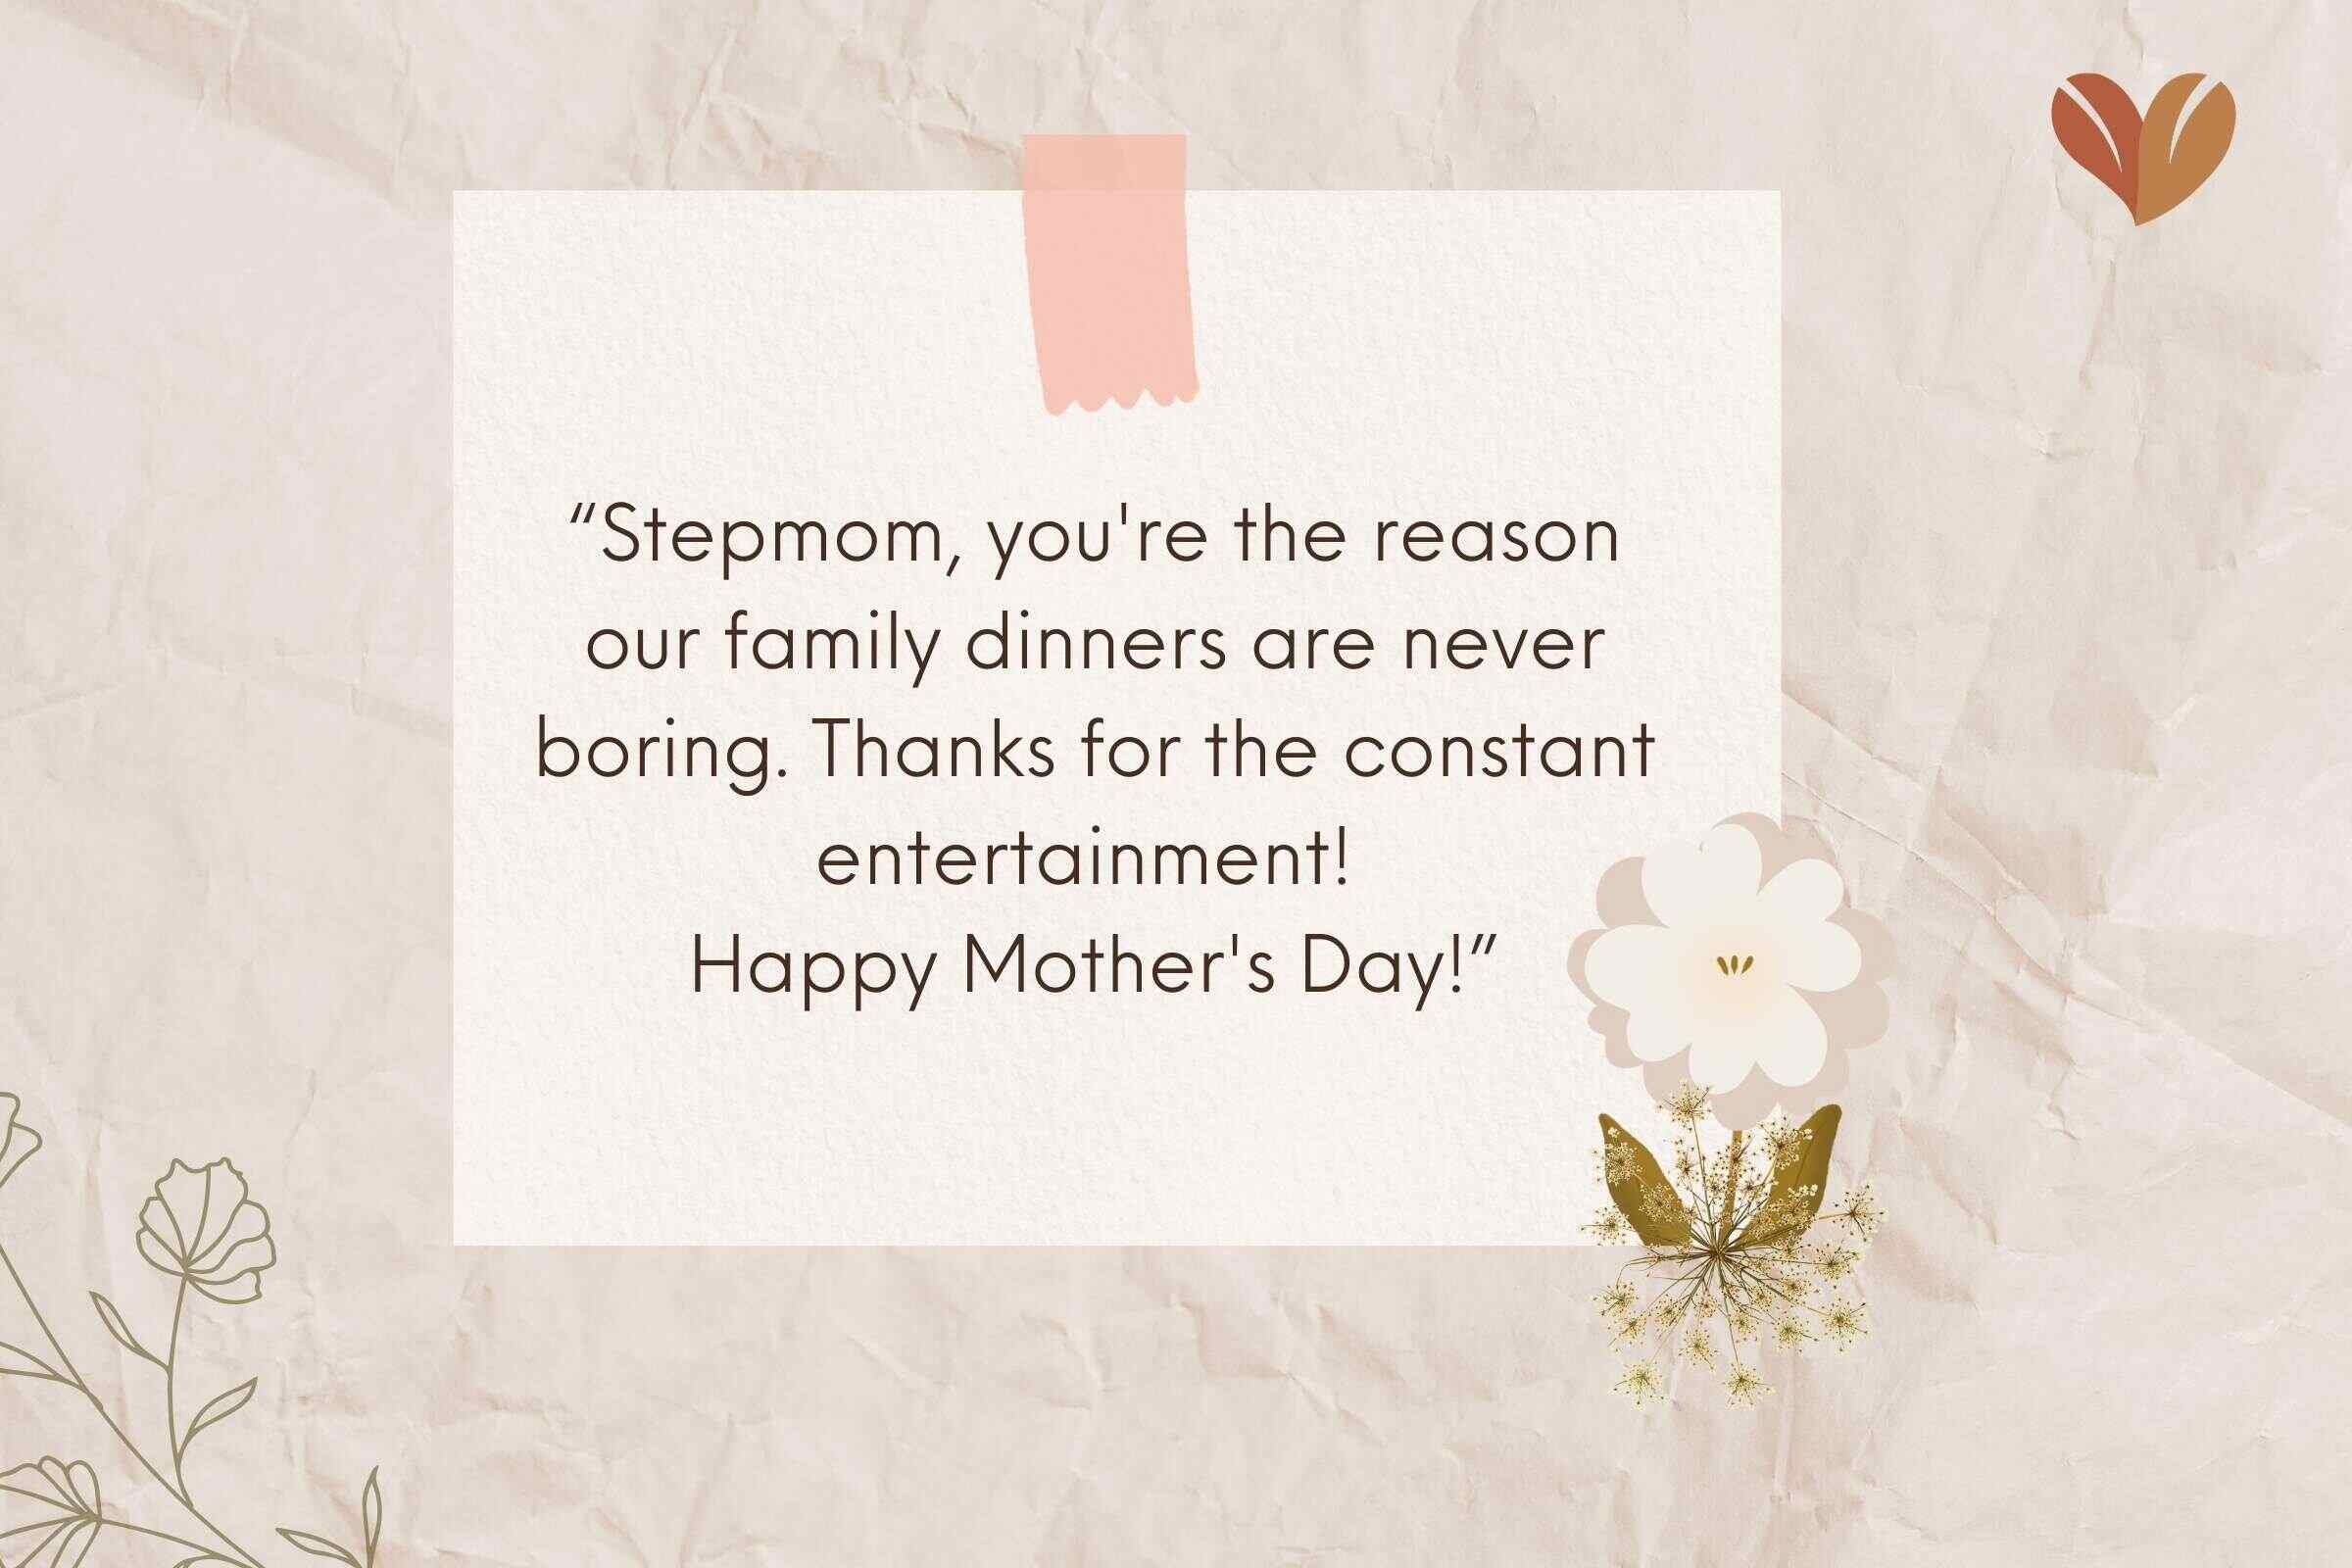 Funny Mother's Day Messages for Stepmom to Show You Care